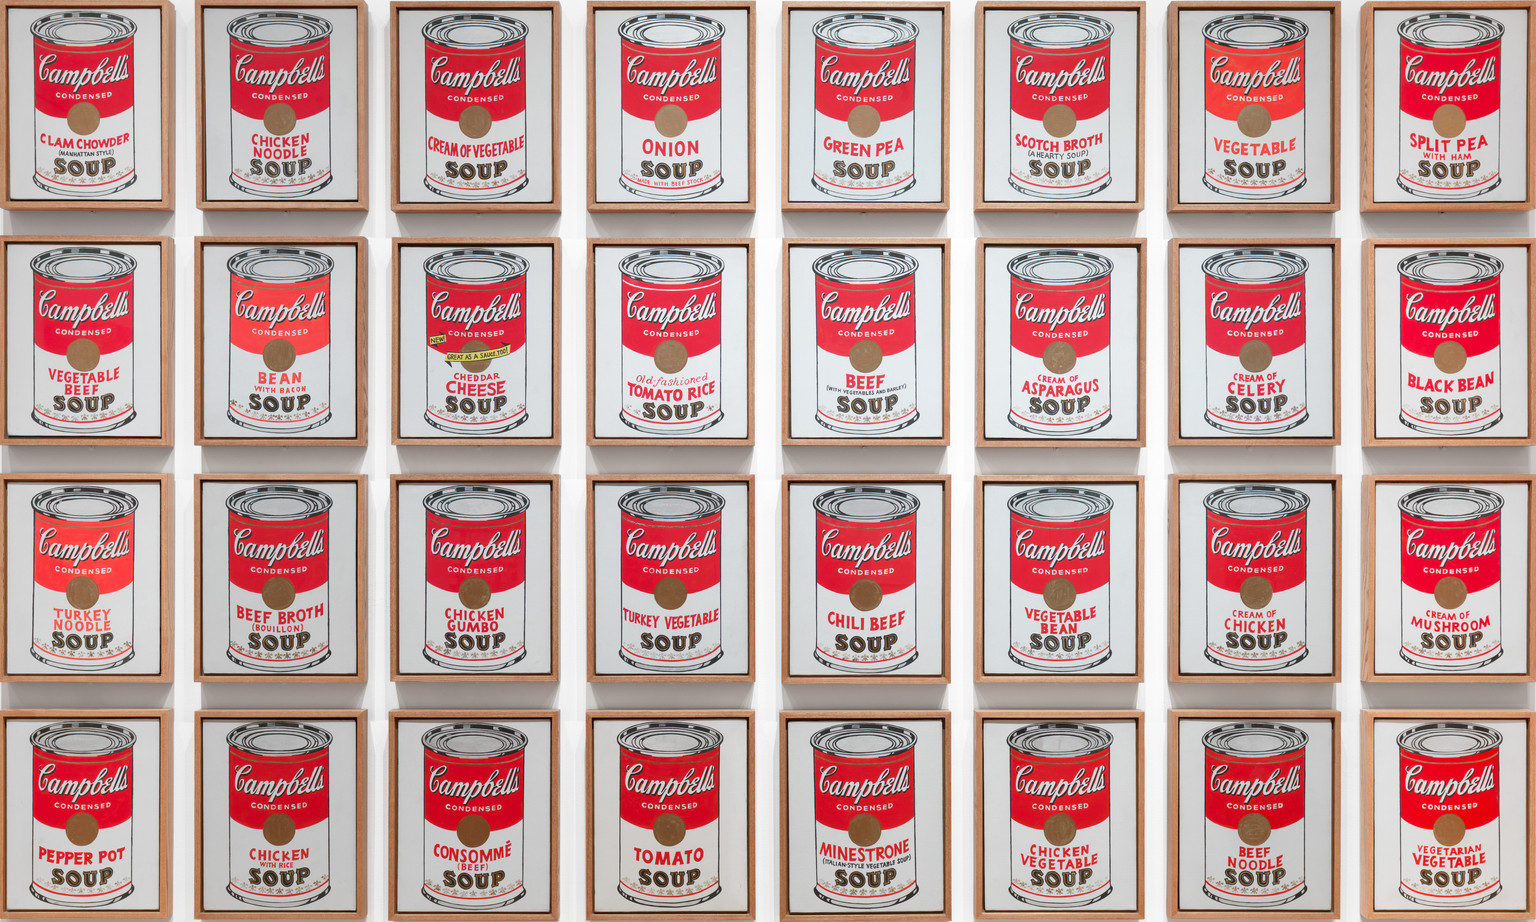 Andy Warhol. Campbell's Soup Cans. 1962. Acrylic with metallic enamel paint on canvas, 32 panels, Each canvas 20 x 16" (50.8 x 40.6 cm). Overall installation with 3" between each panel is 97" high x 163" wide. Partial gift of Irving Blum Additional funding provided by Nelson A. Rockefeller Bequest, gift of Mr. and Mrs. William A. M. Burden, Abby Aldrich Rockefeller Fund, gift of Nina and Gordon Bunshaft, acquired through the Lillie P. Bliss Bequest, Philip Johnson Fund, Frances R. Keech Bequest, gift of Mrs. Bliss Parkinson, and Florence B. Wesley Bequest (all by exchange). © 2019 Andy Warhol Foundation / ARS, NY / ™ Licensed by Campbell's Soup Co. All rights reserved.